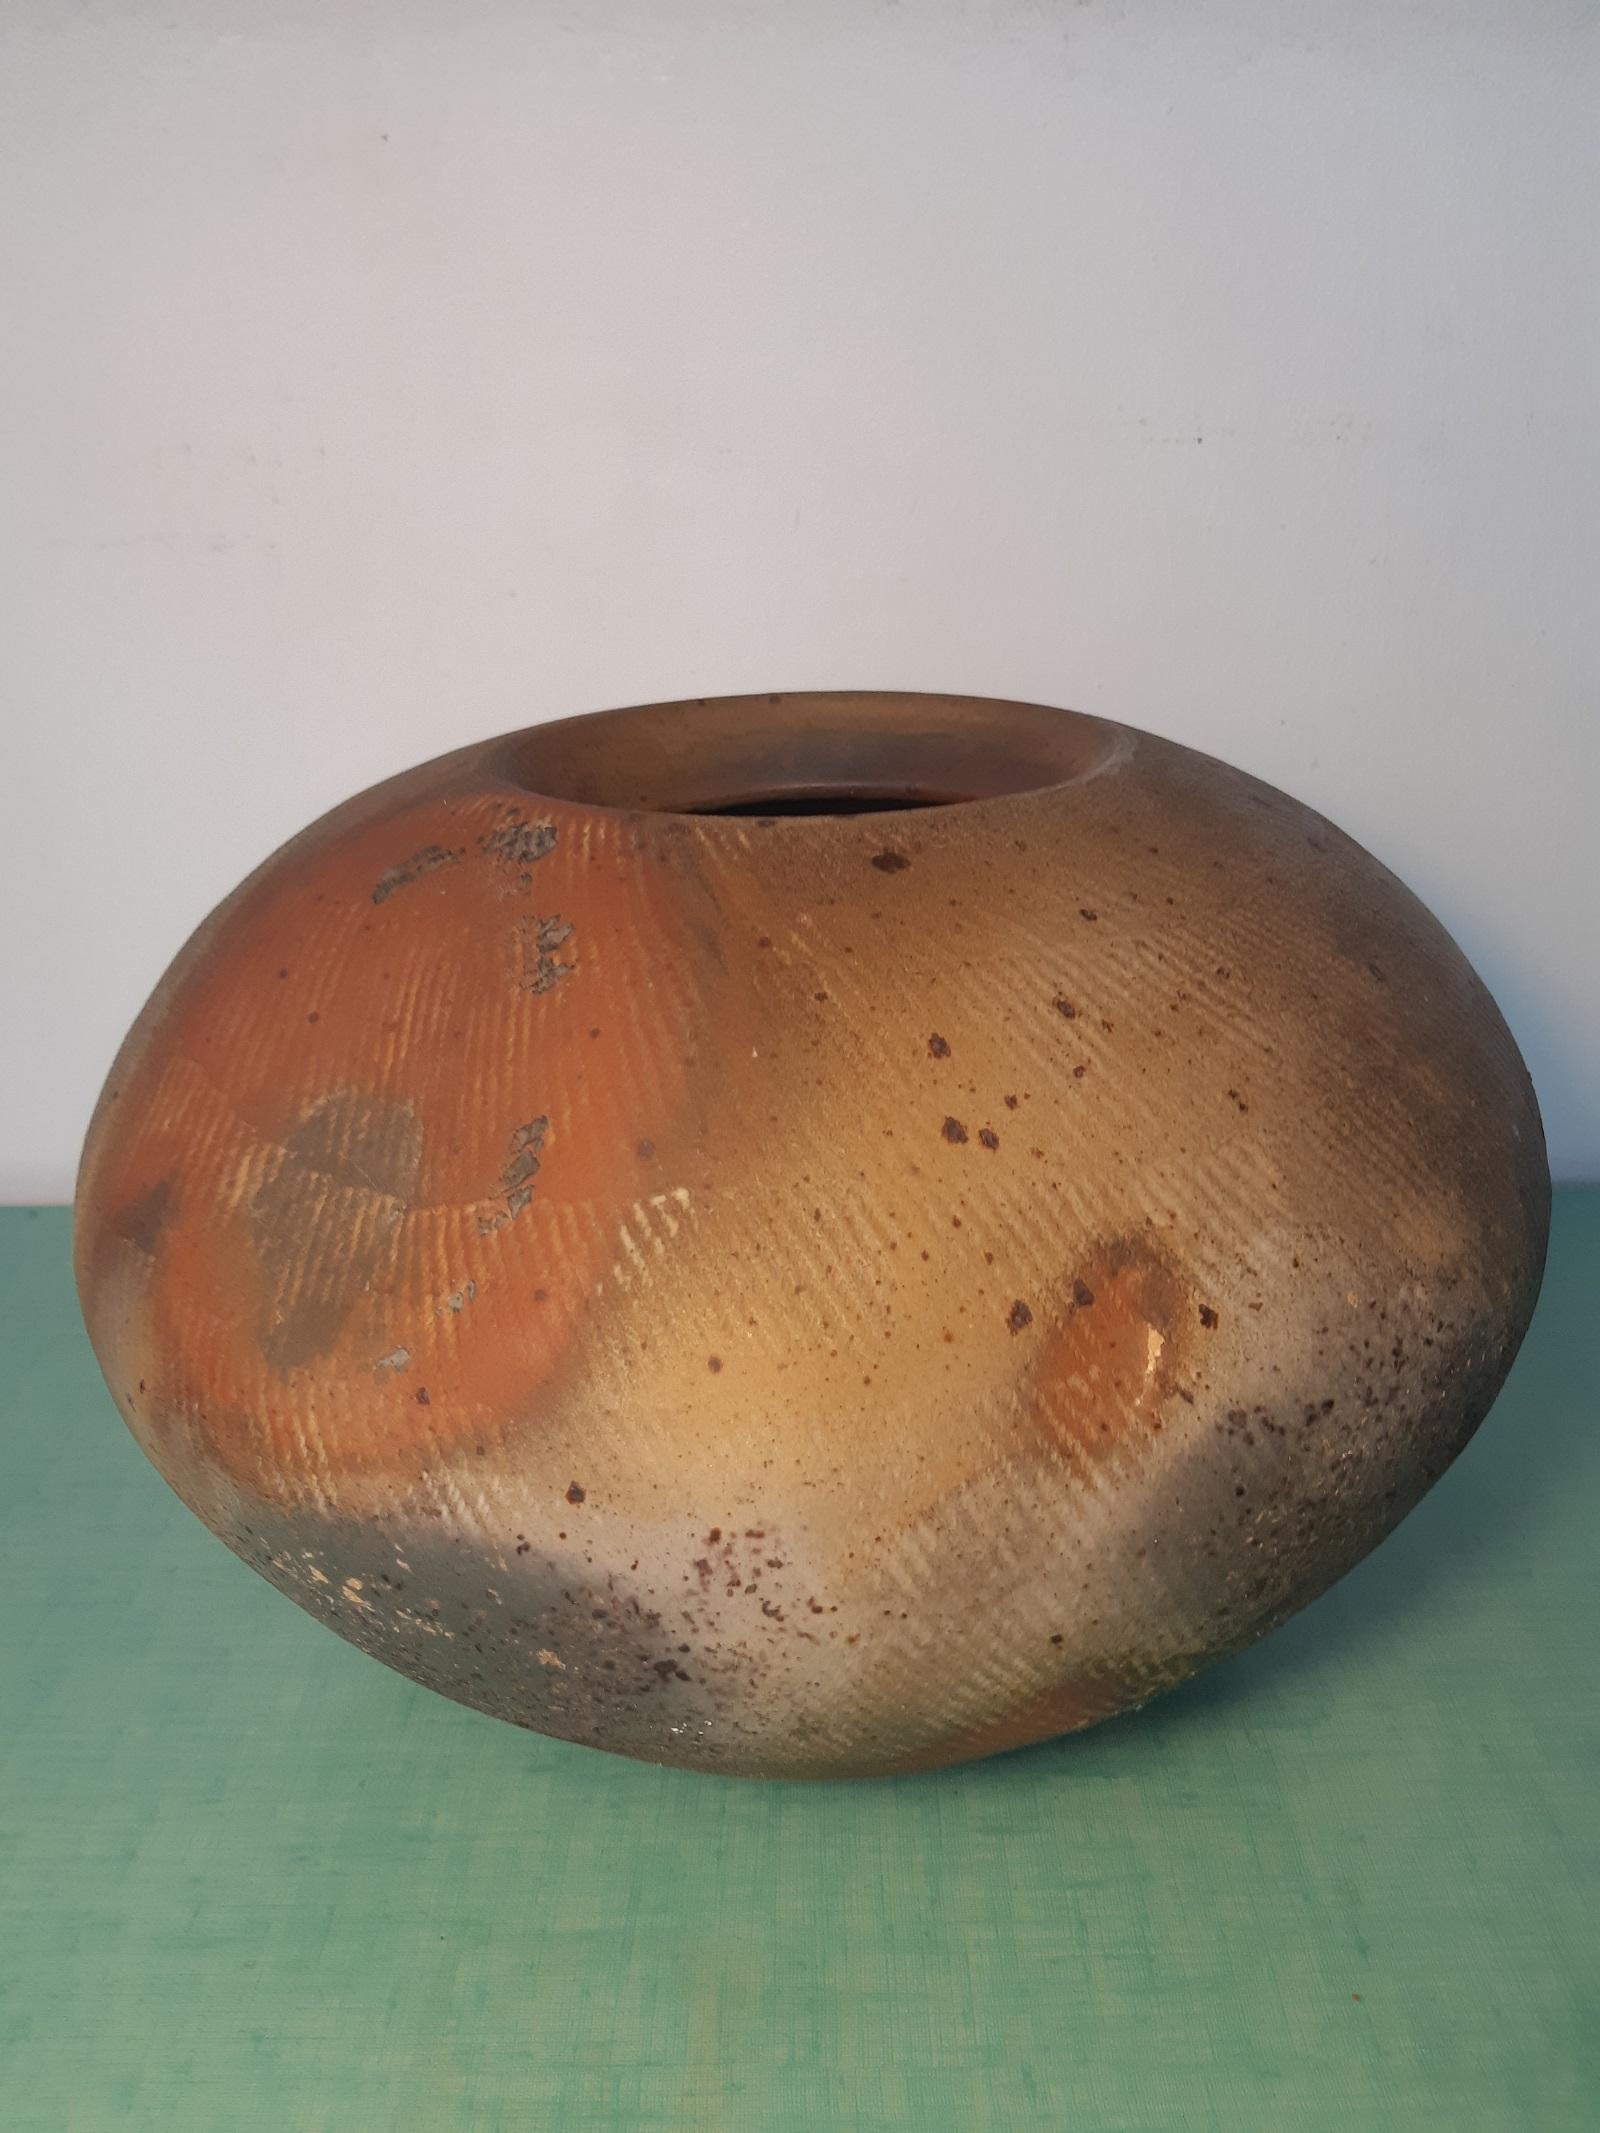 Ceramic Sculpture, Vase by Eric Astoul 1995 La Borne In Good Condition For Sale In Toulouse, Midi-Pyrénées